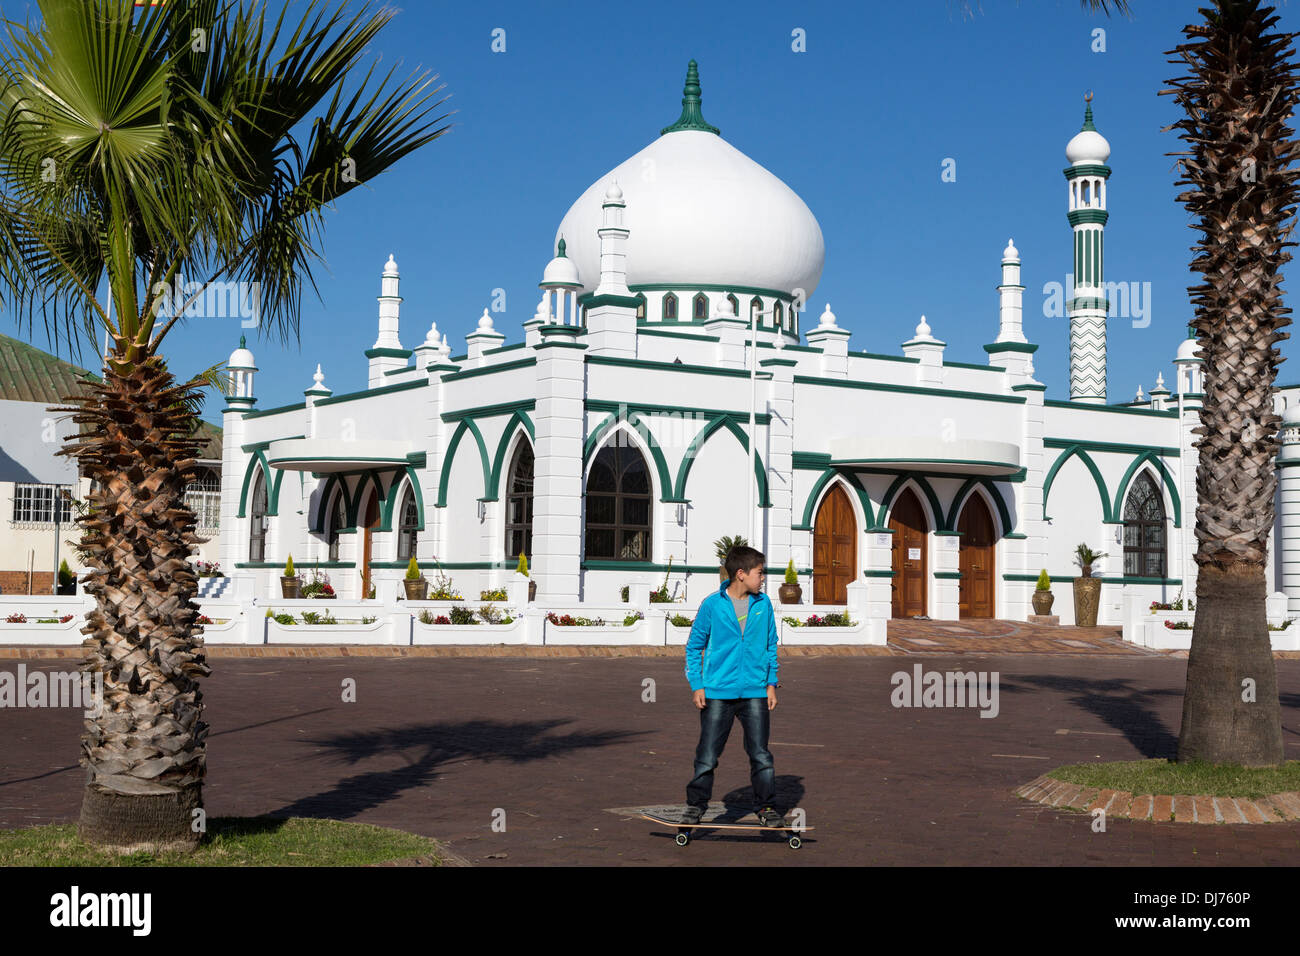 Cape Town, South Africa. Boy on a Skate Board in front of the Tomb of Maulana Abd al-Latif (died 1916). Stock Photo